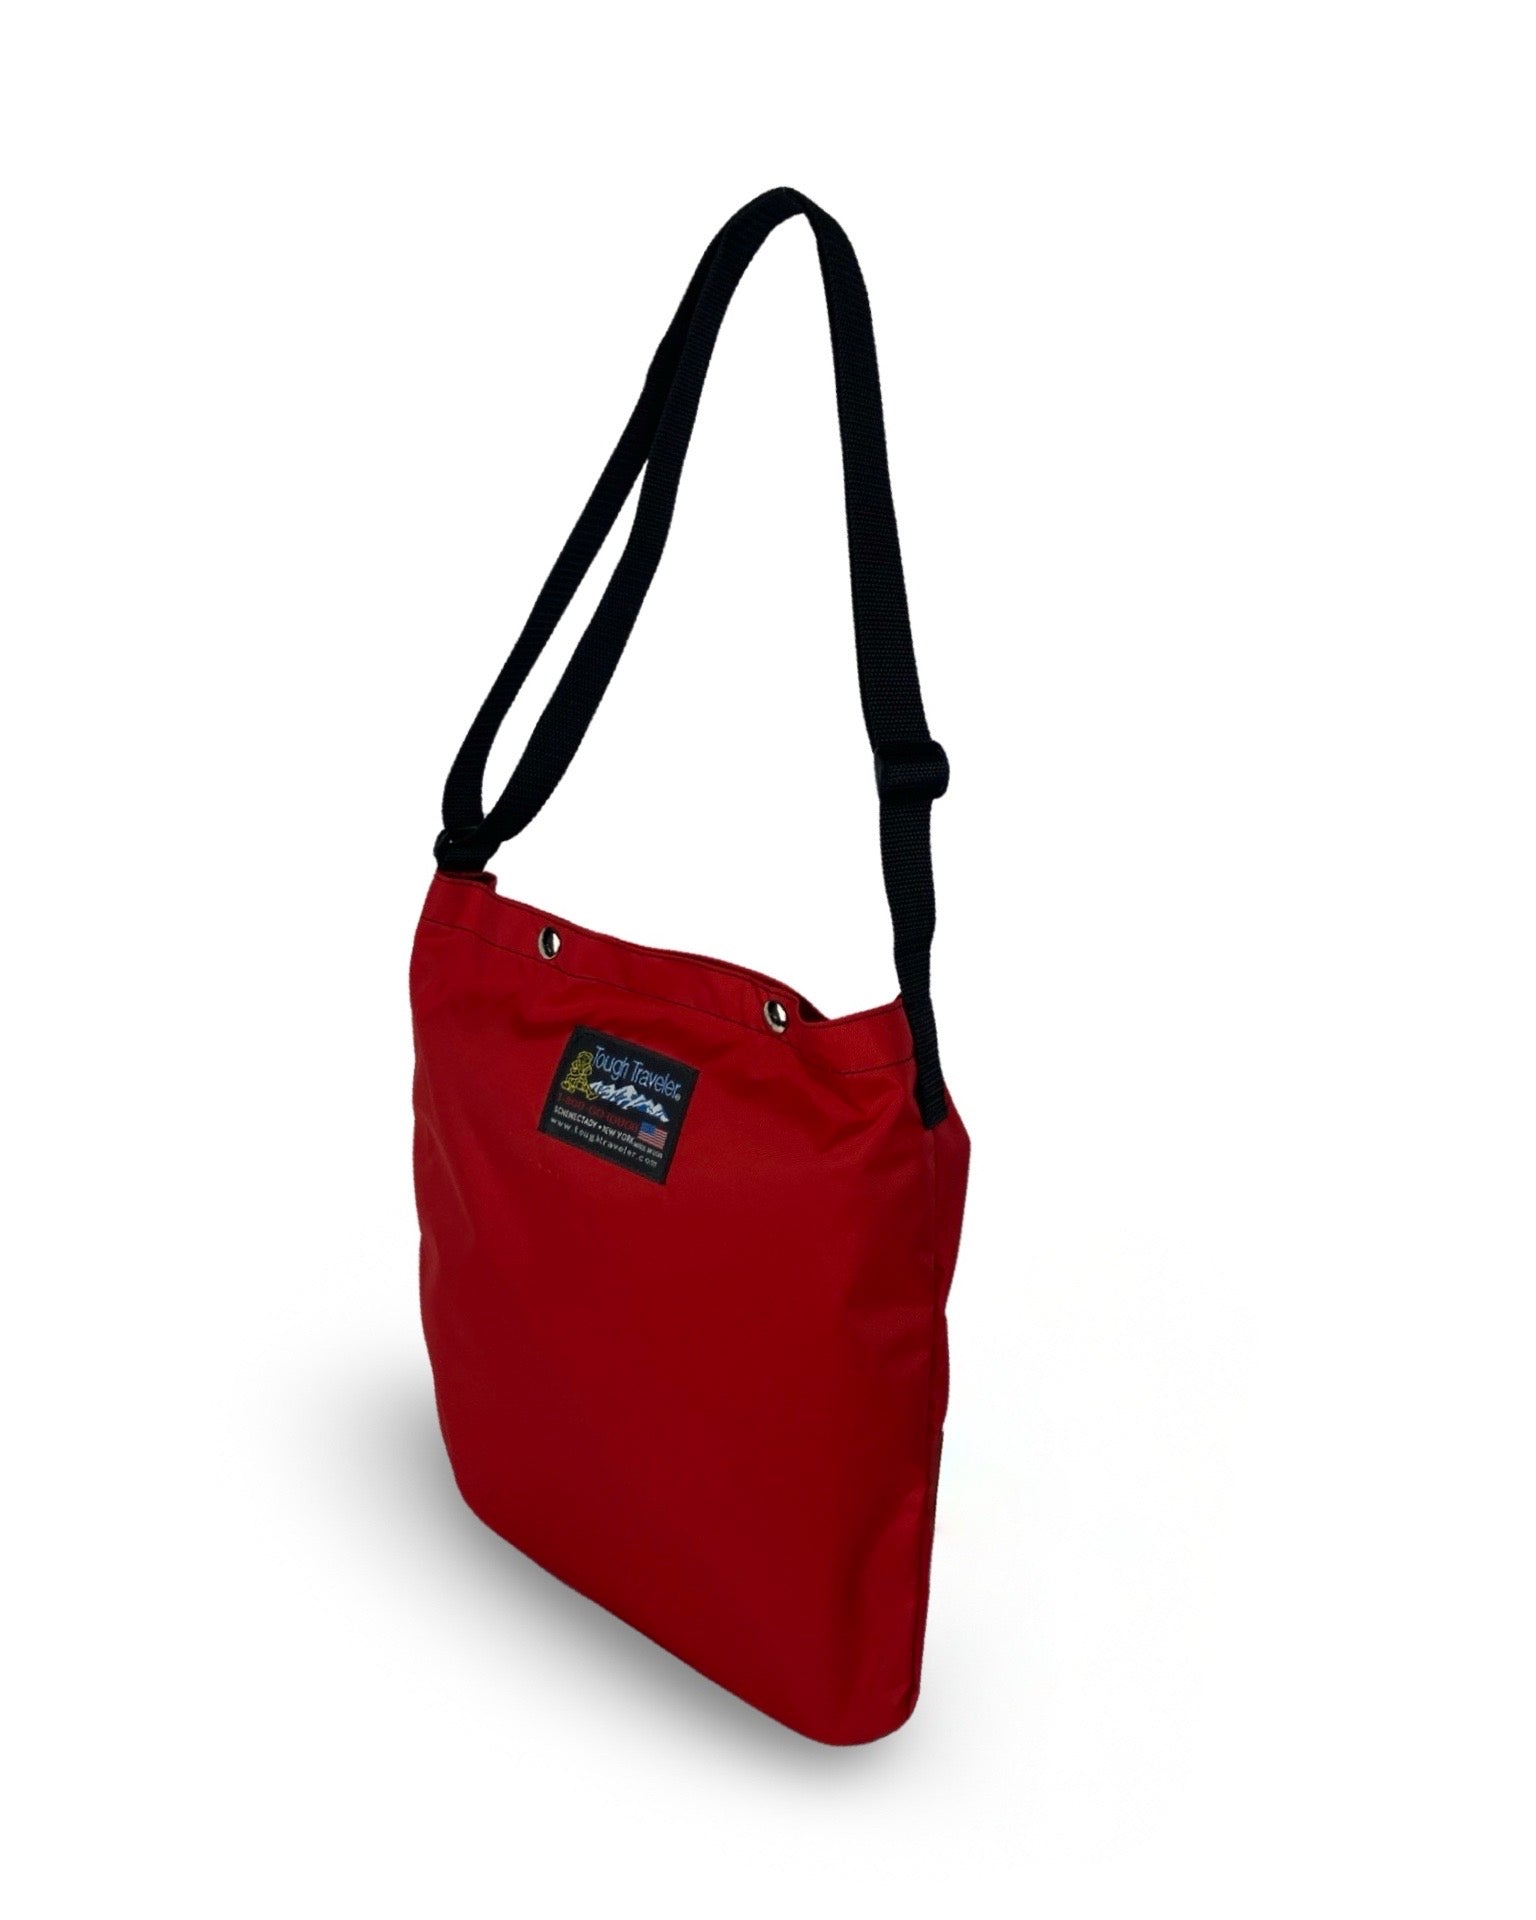 FB TOTE Tote Bags, by Tough Traveler. Made in USA since 1970